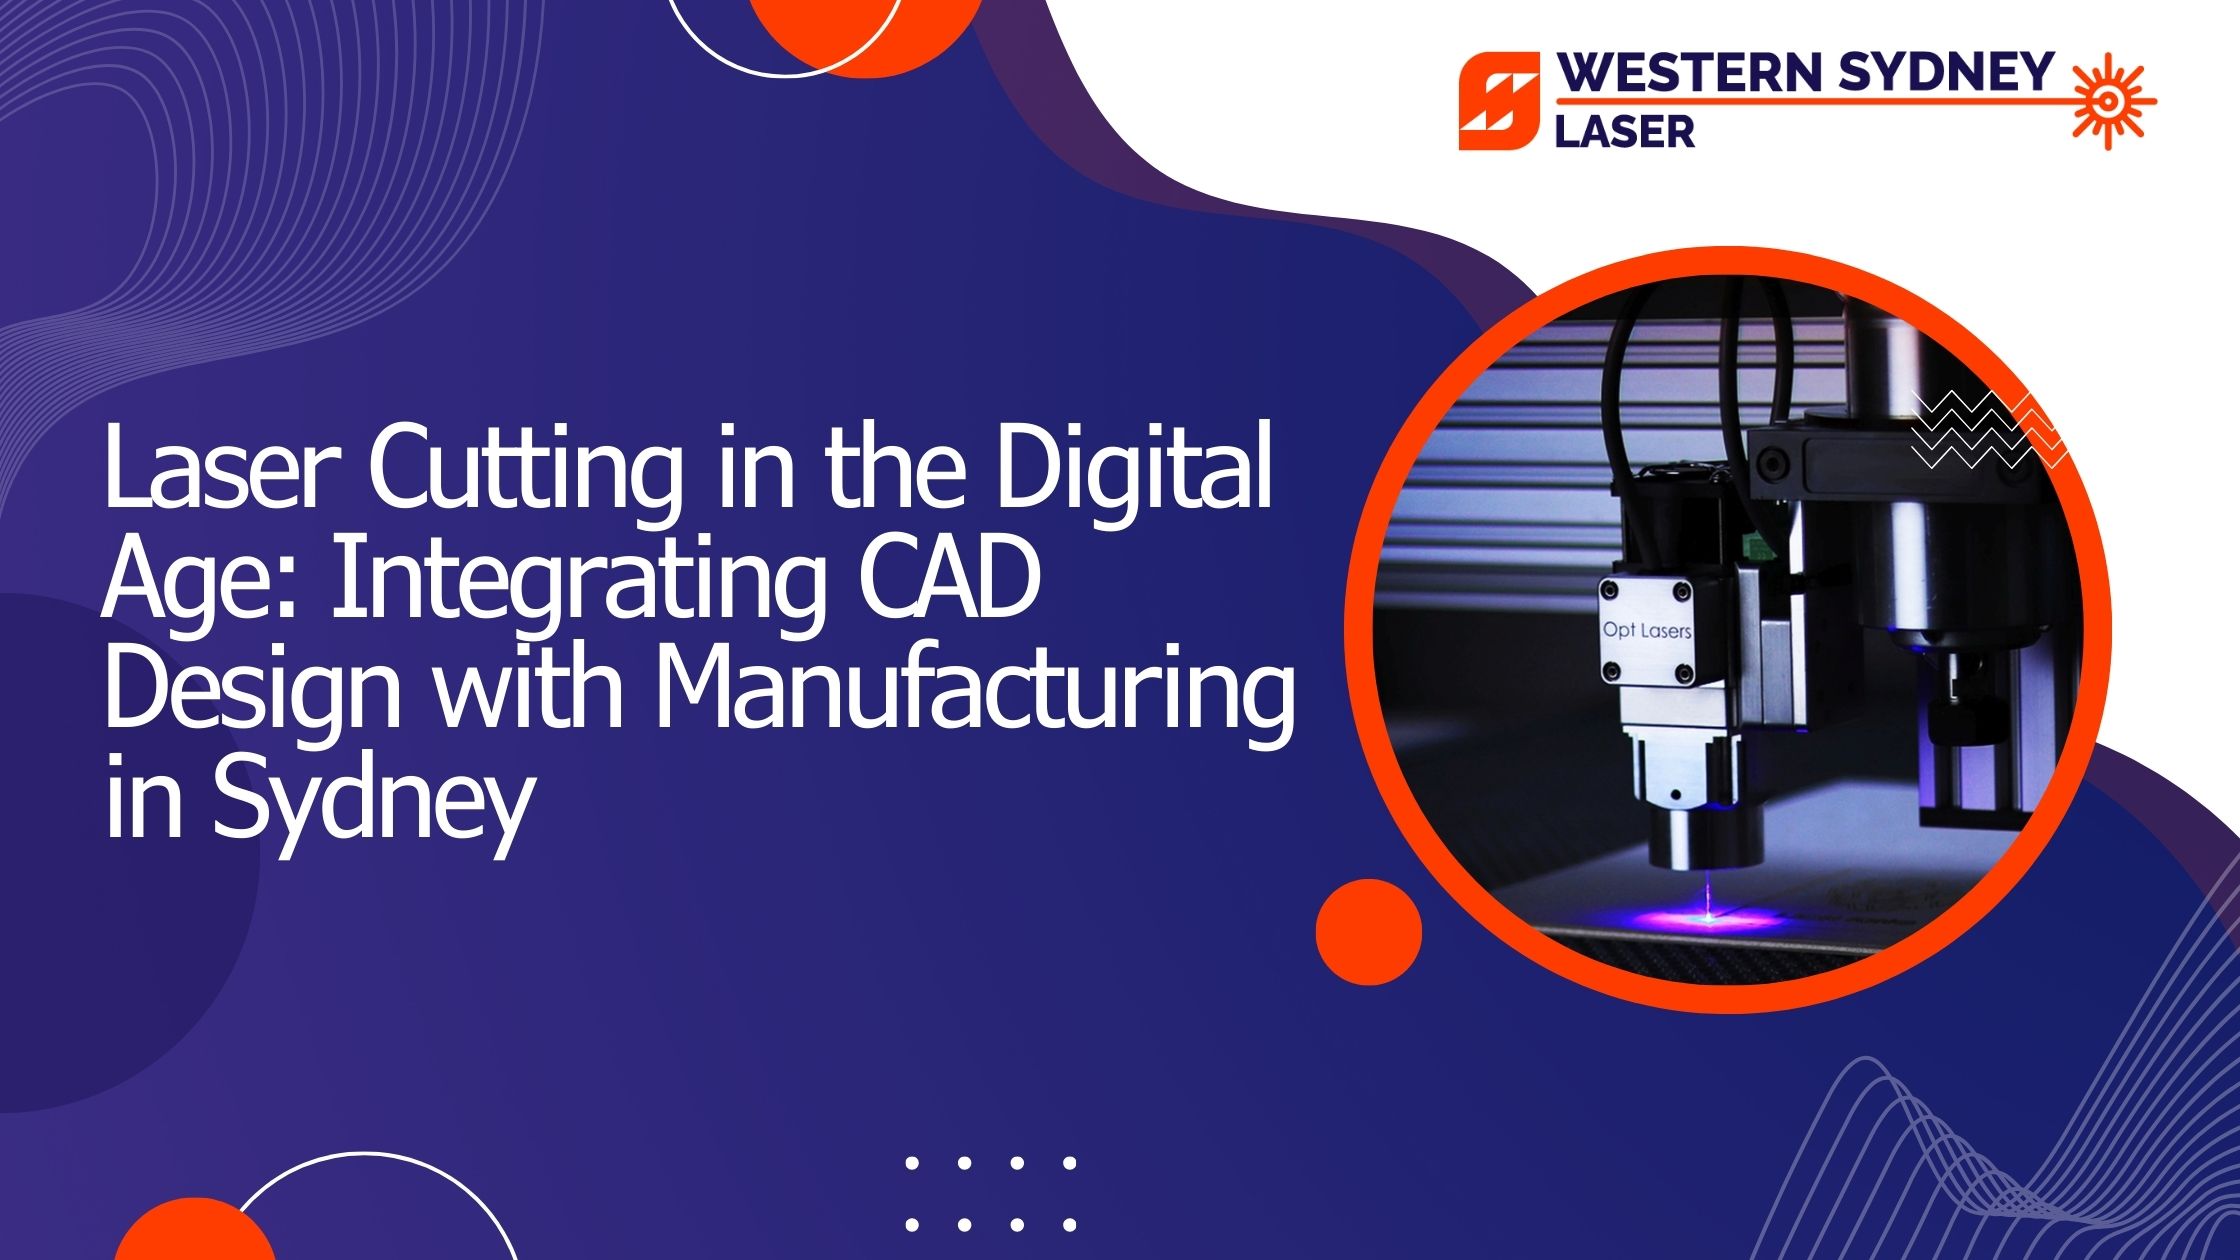 Laser Cutting in the Digital Age: Integrating CAD Design with Manufacturing in Sydney